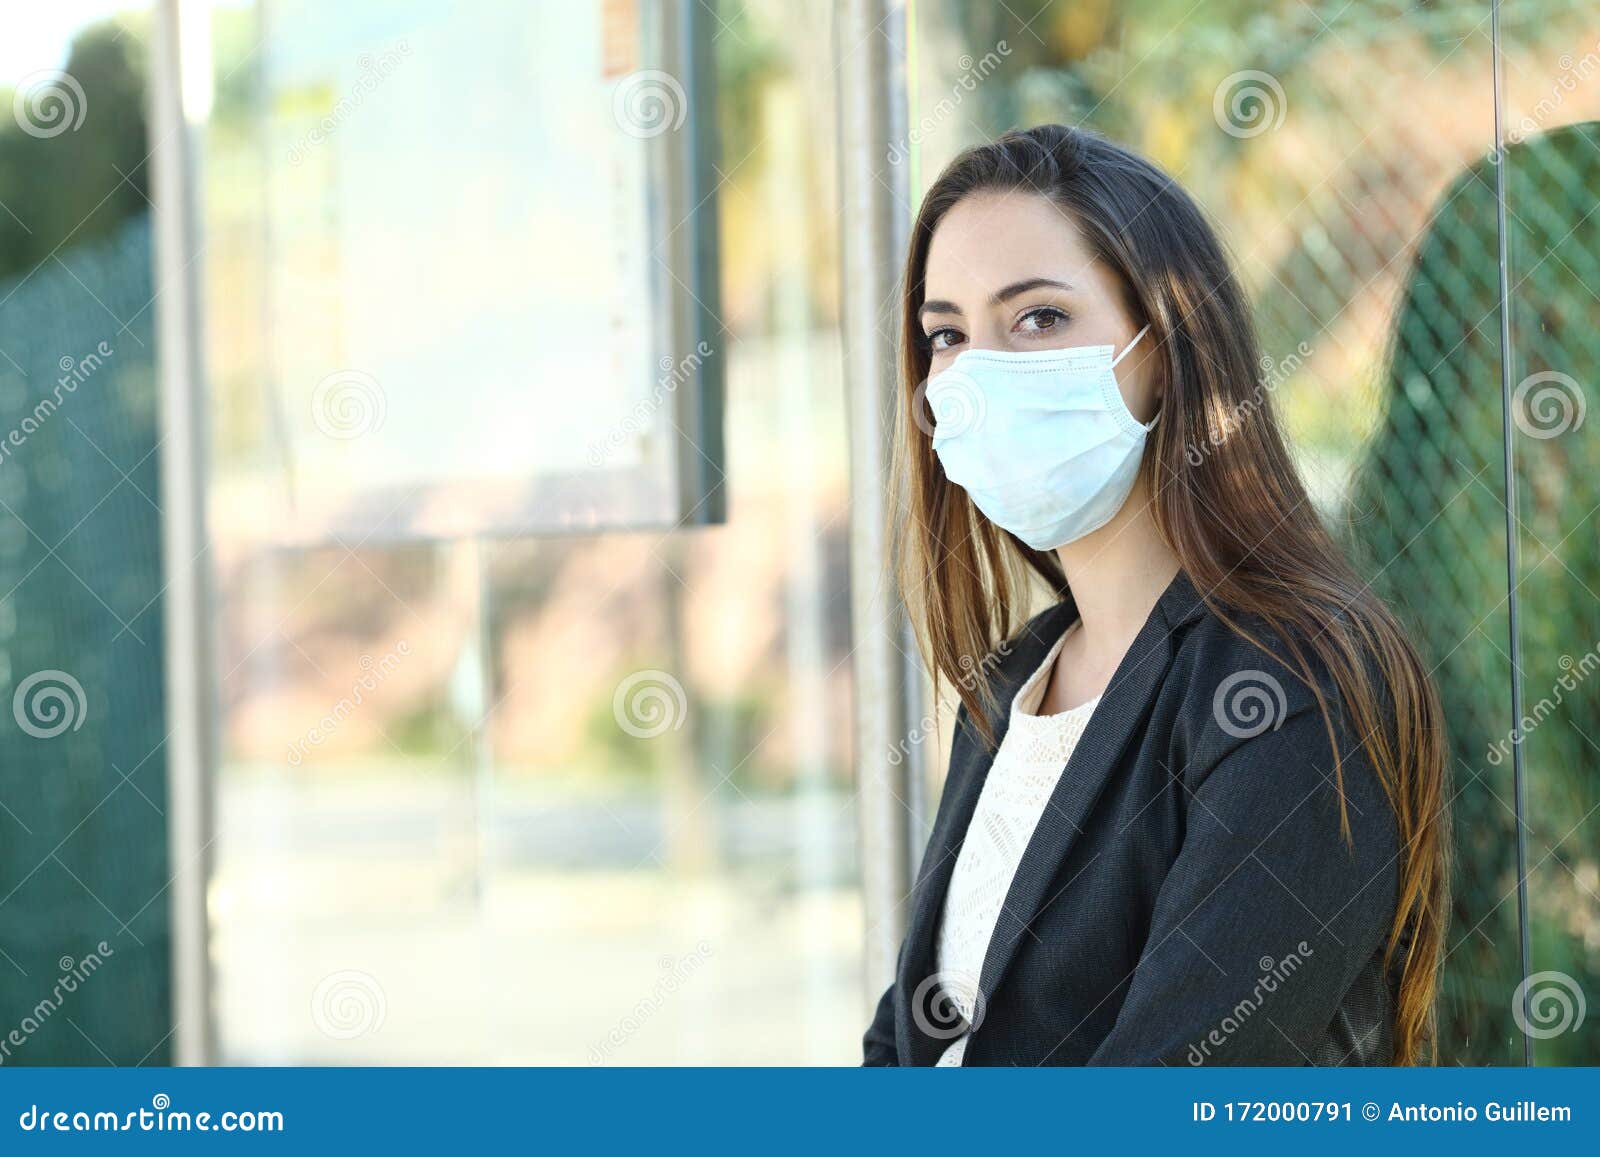 woman wearing a mask to prevent contagion in a bus stop